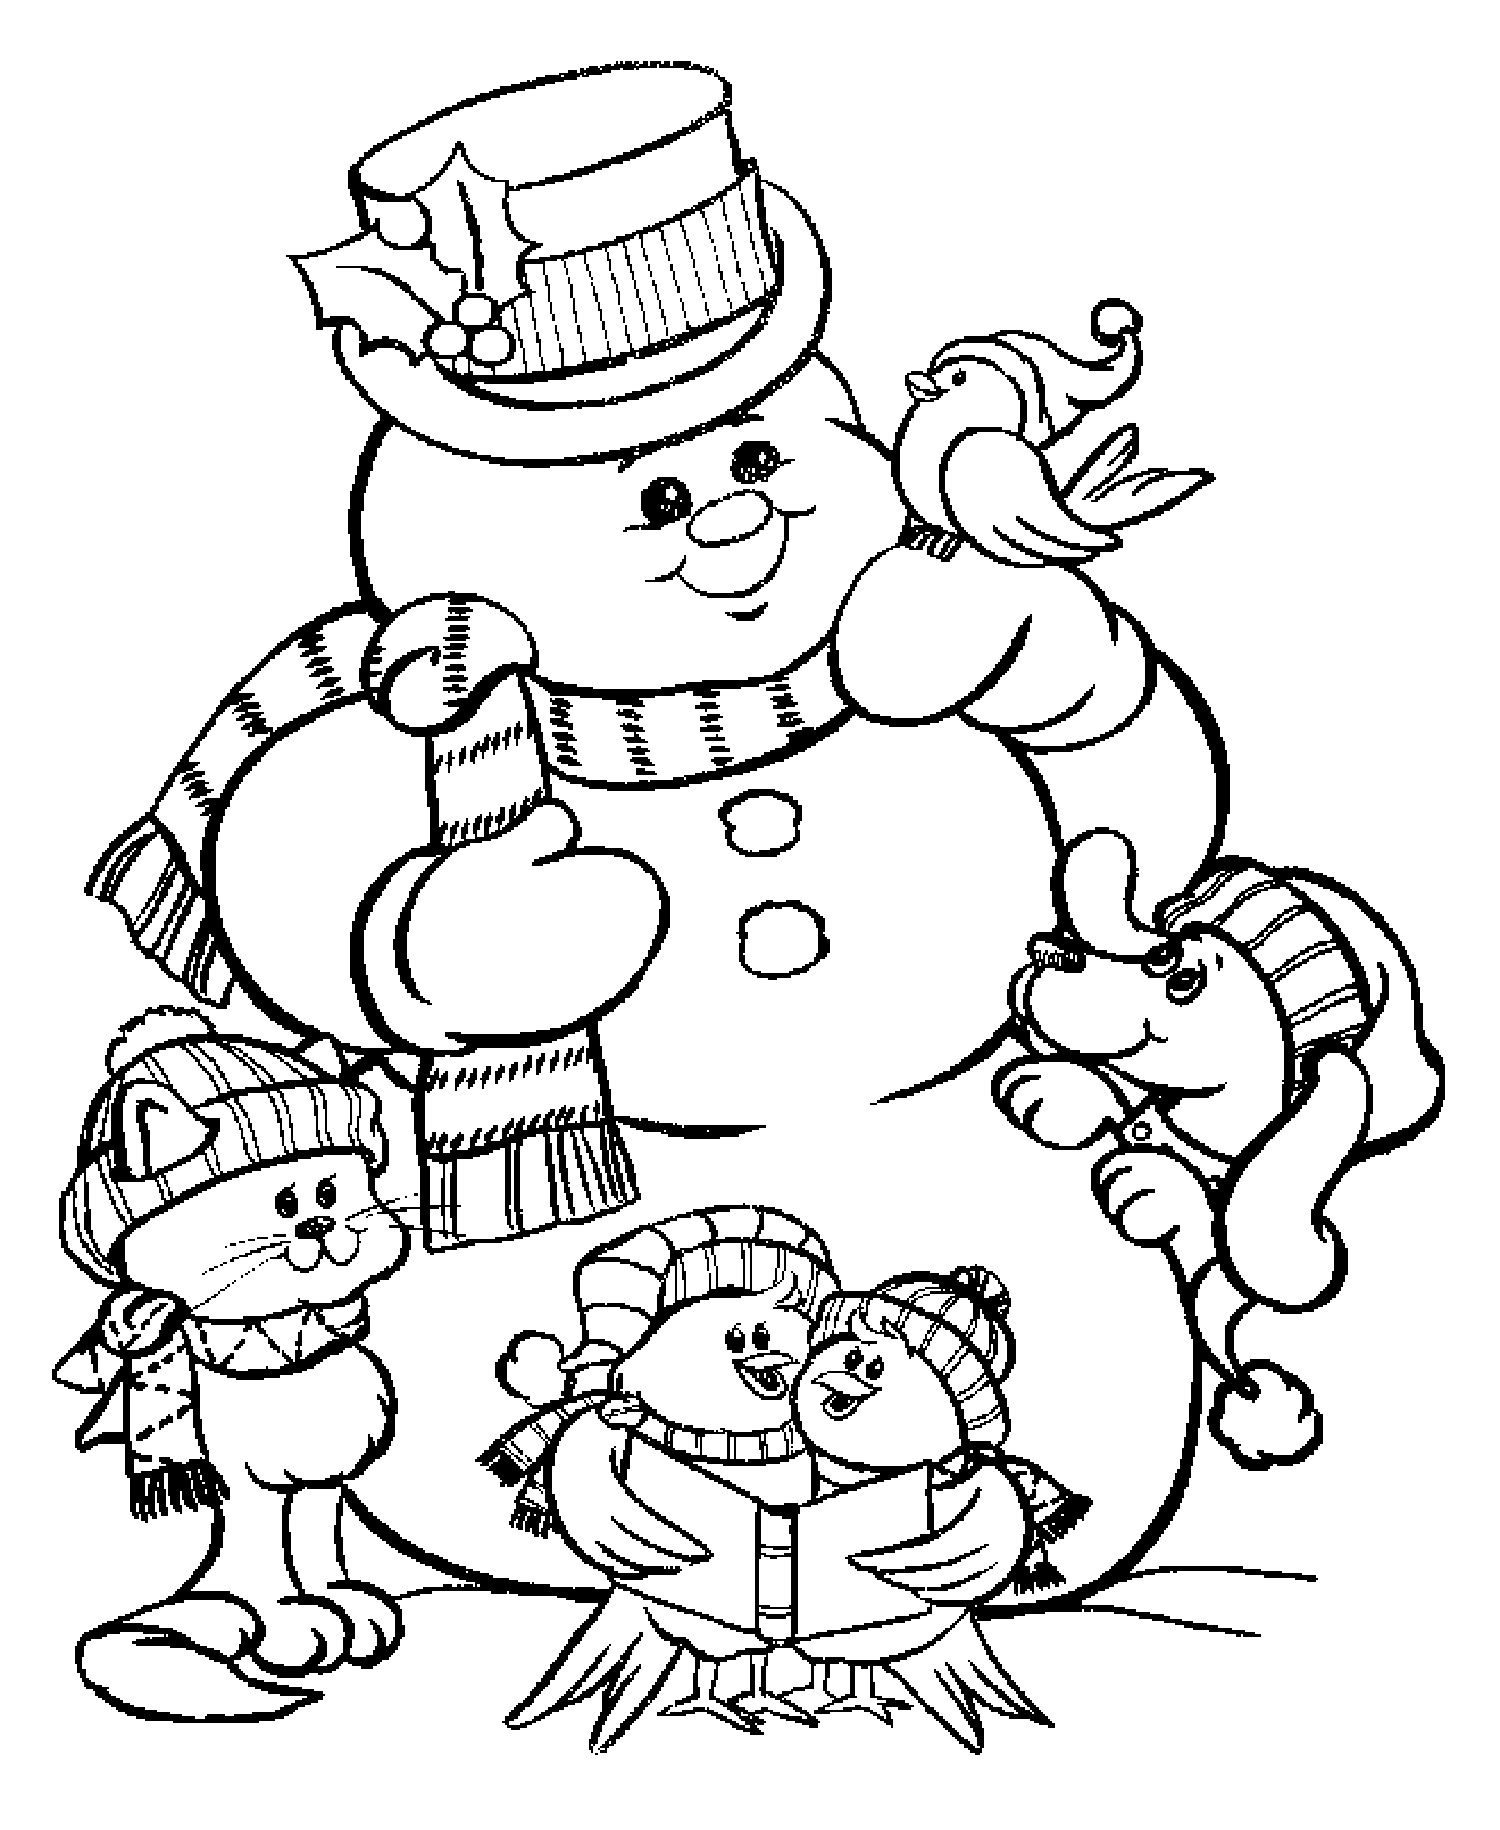 Coloring Pages Of Snowmen Snowman Christmas Coloring Pages For Kids To Print Color